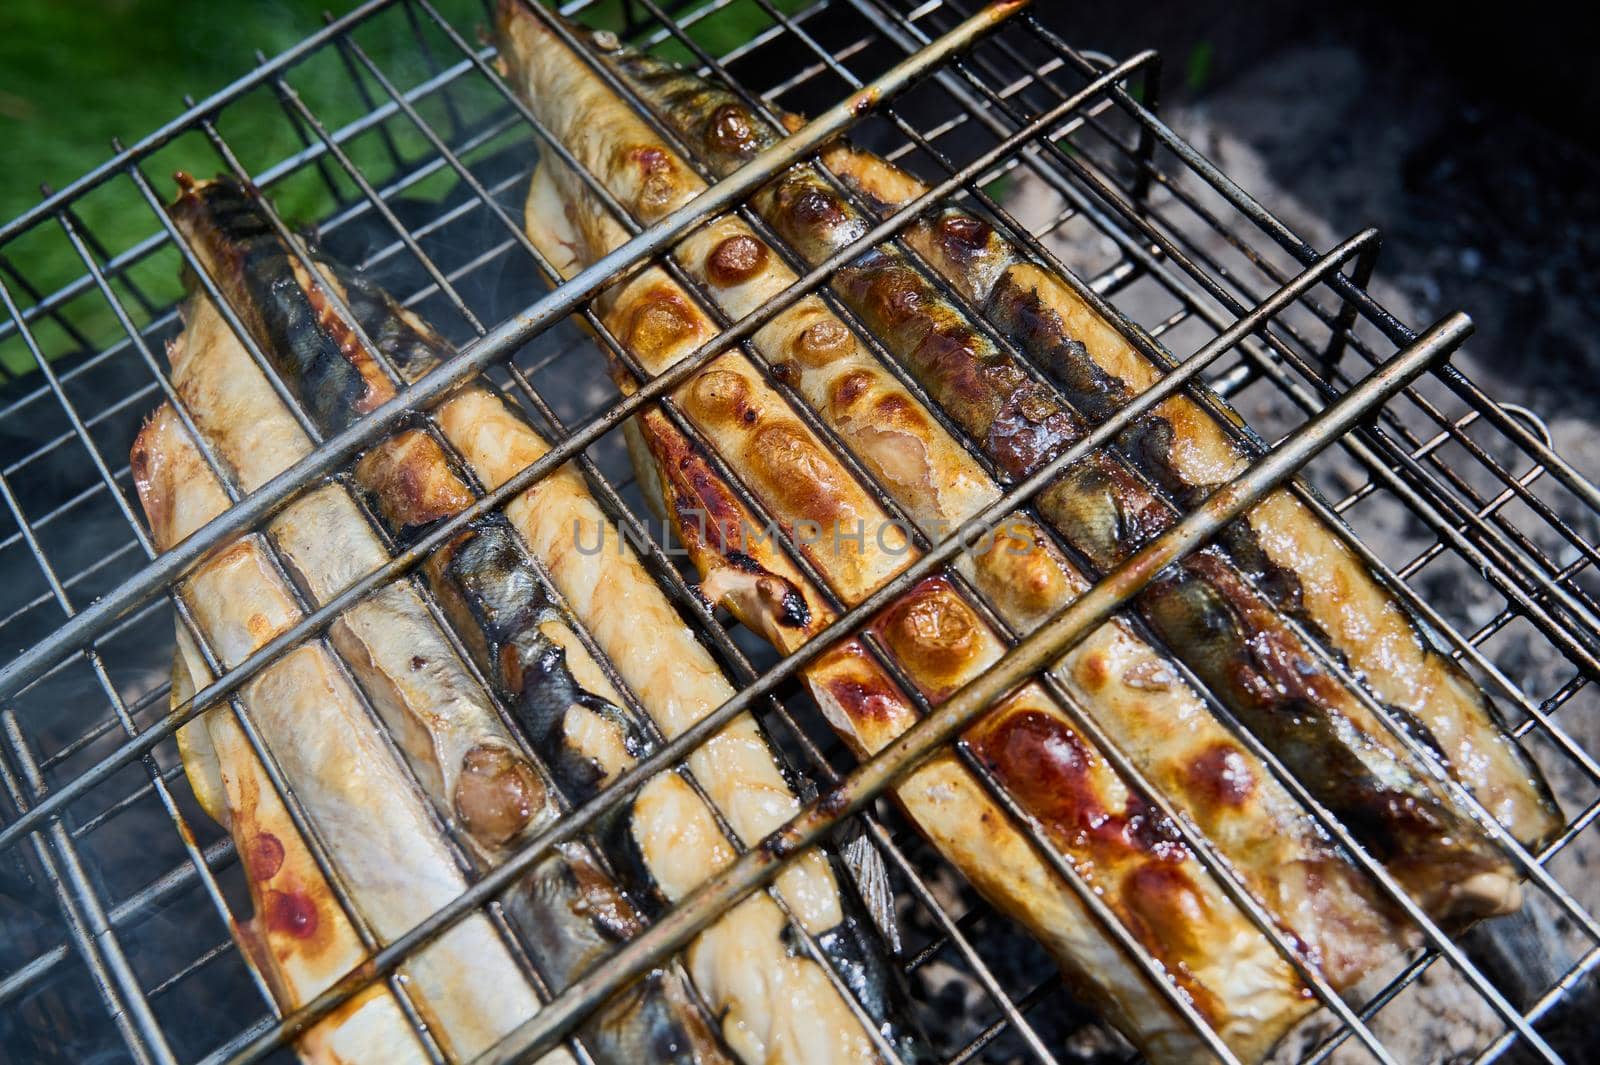 Barbecue of fish in nature in summer by ISRAFOTO